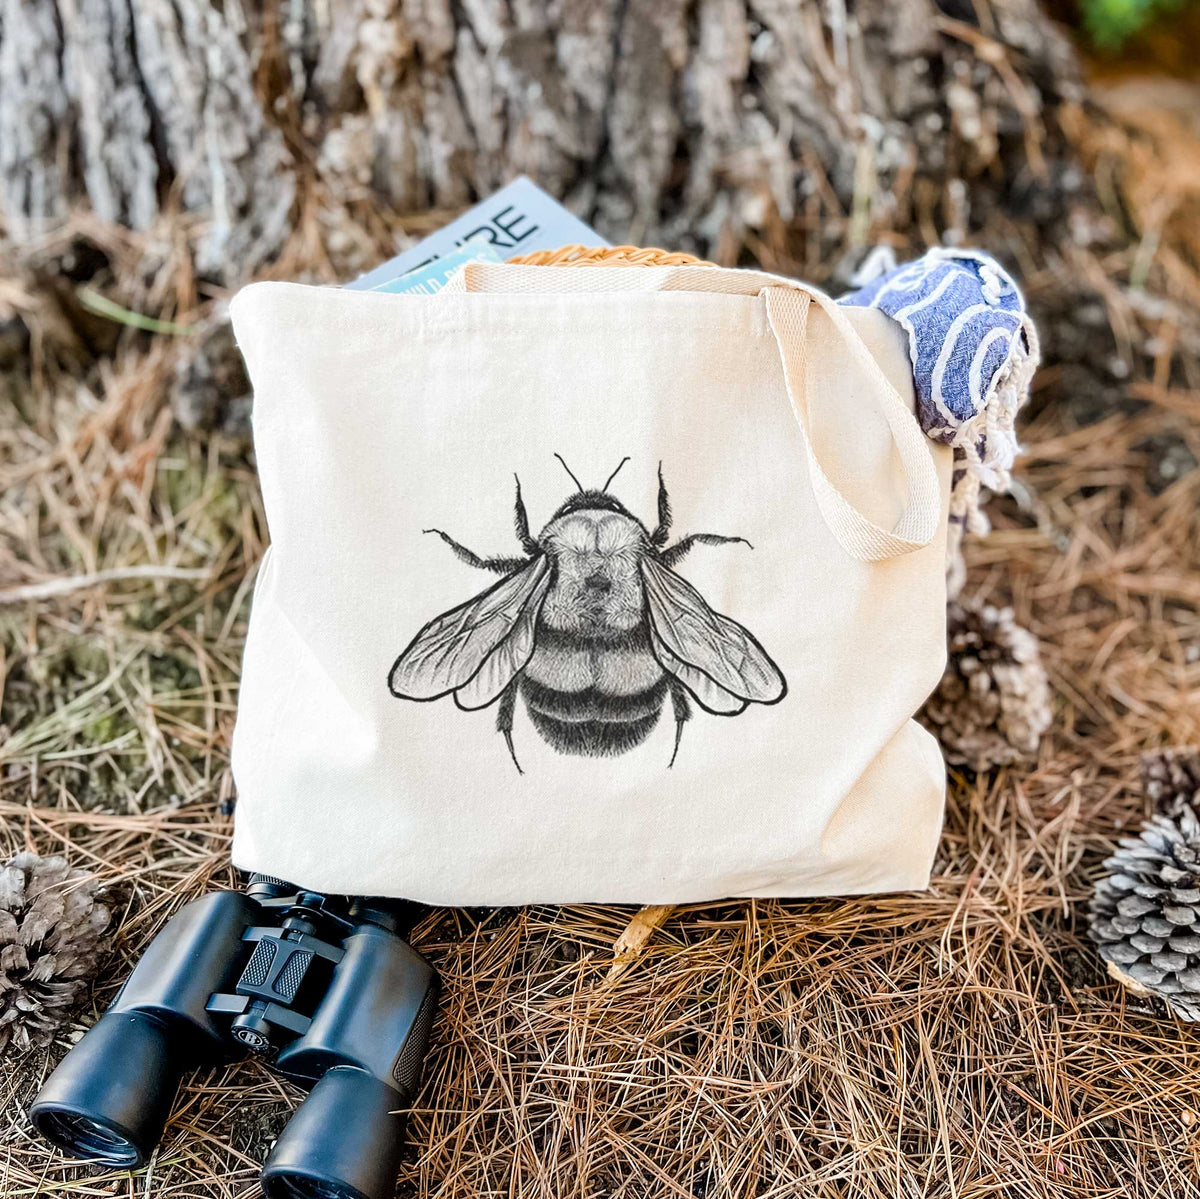 Bombus Affinis - Rusty-Patched Bumble Bee - Tote Bag